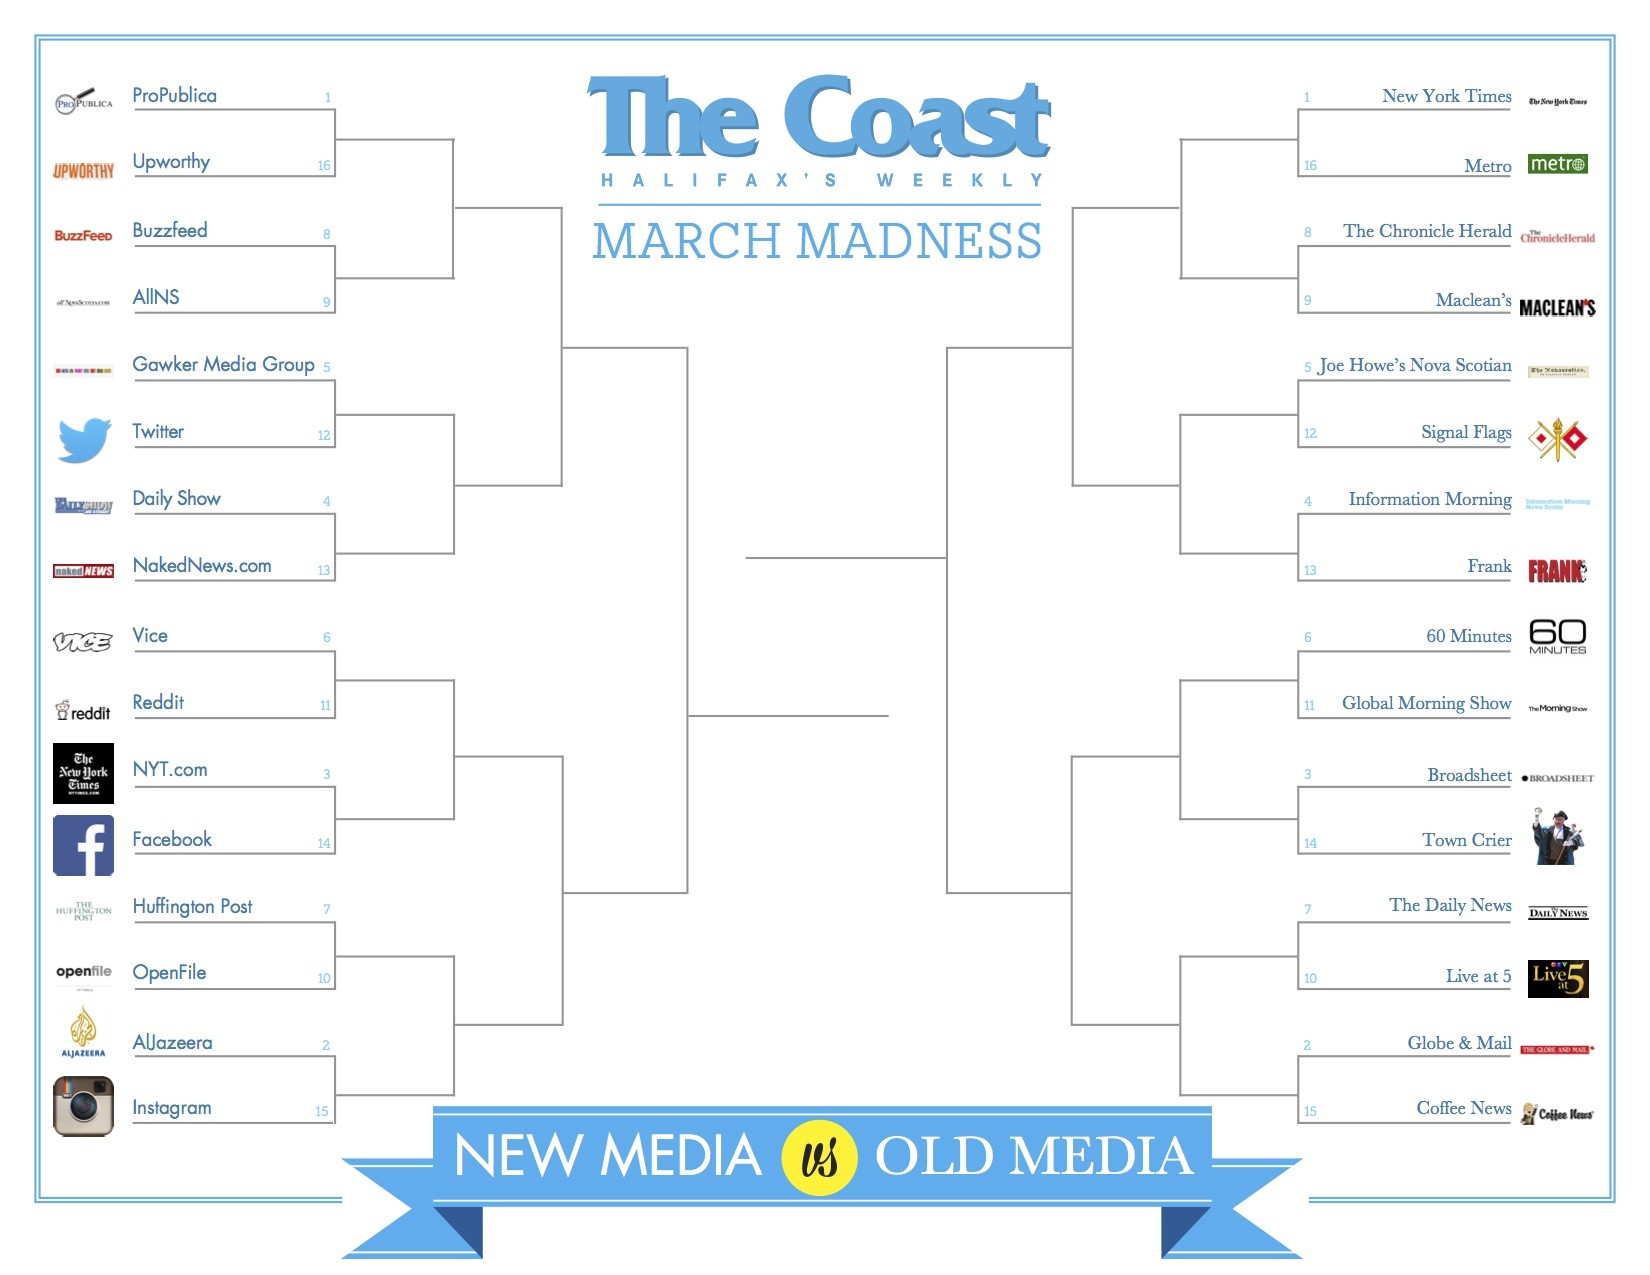 March Madness Day 6: NYT.com vs Facebook & Broadsheet vs. Town Crier